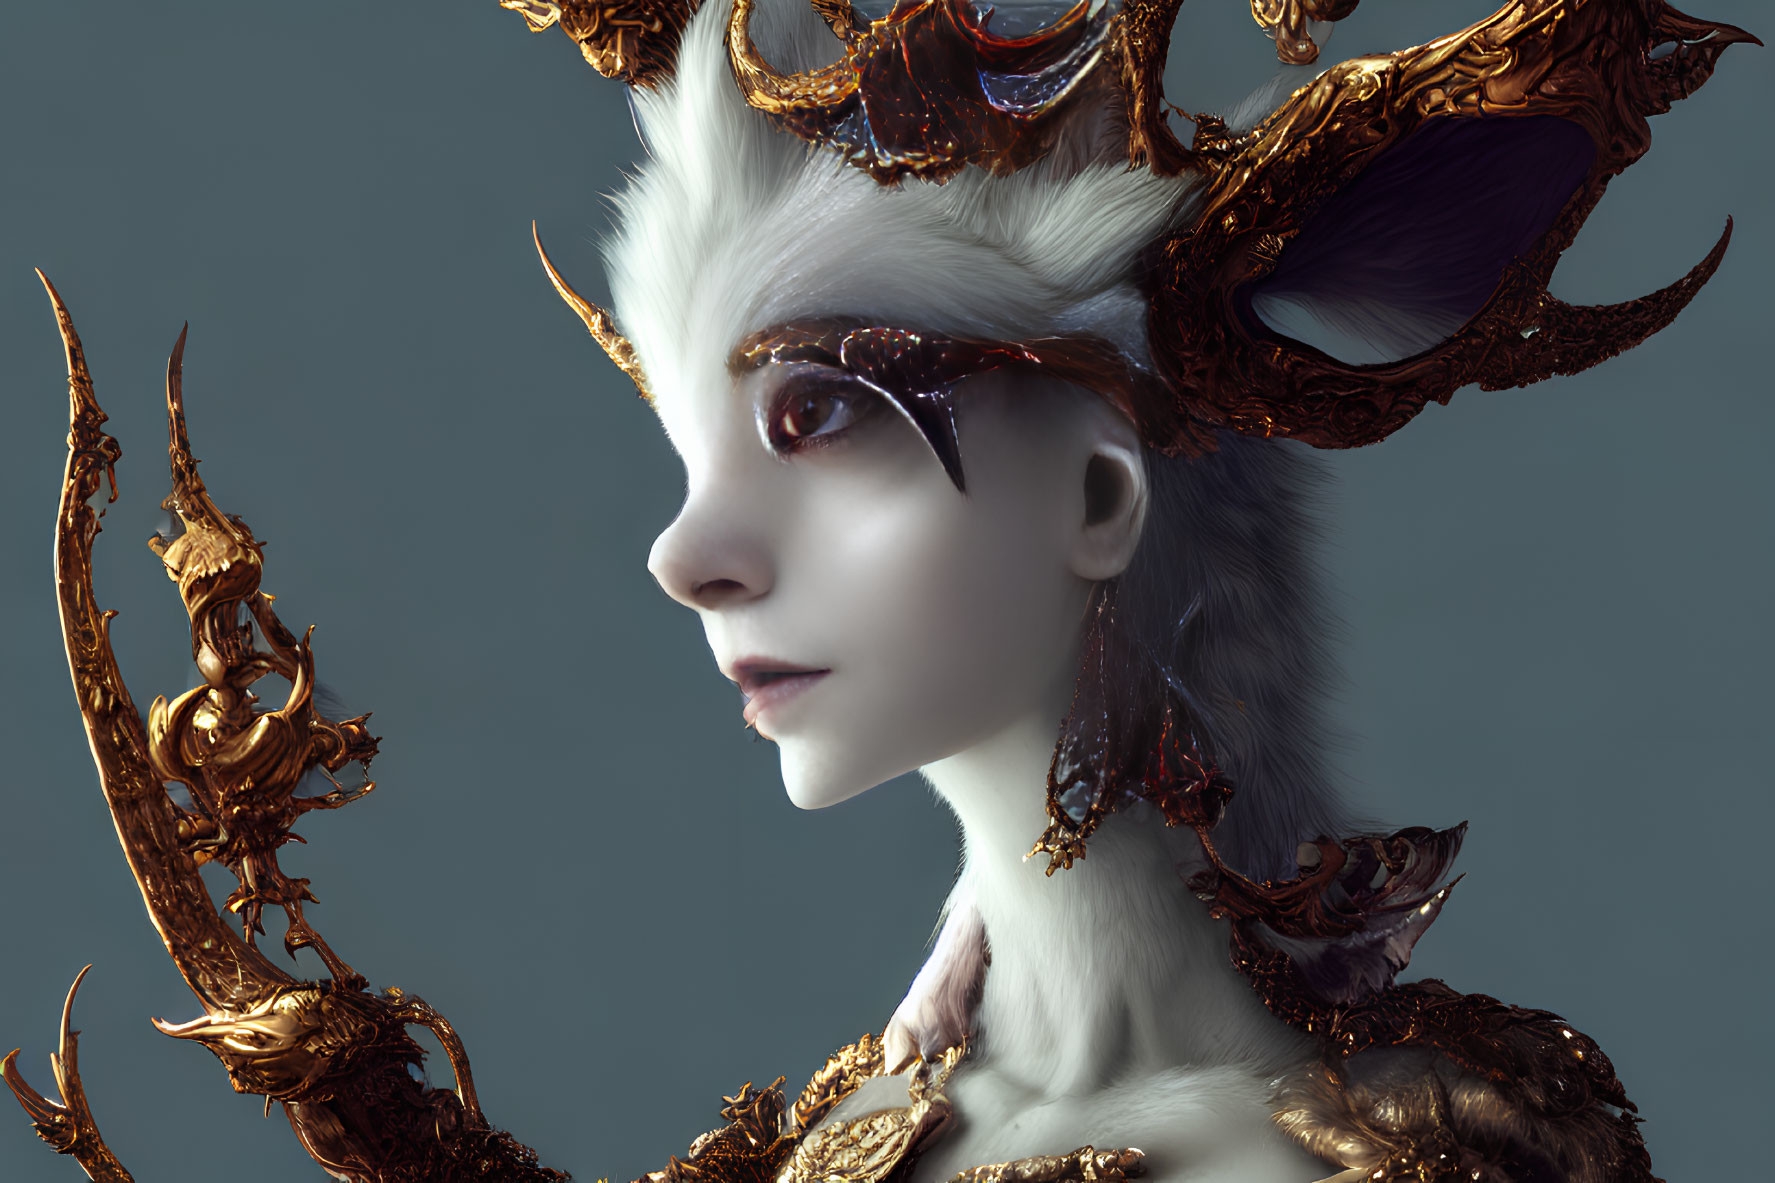 Majestic creature with white fur, golden armor, and antlers